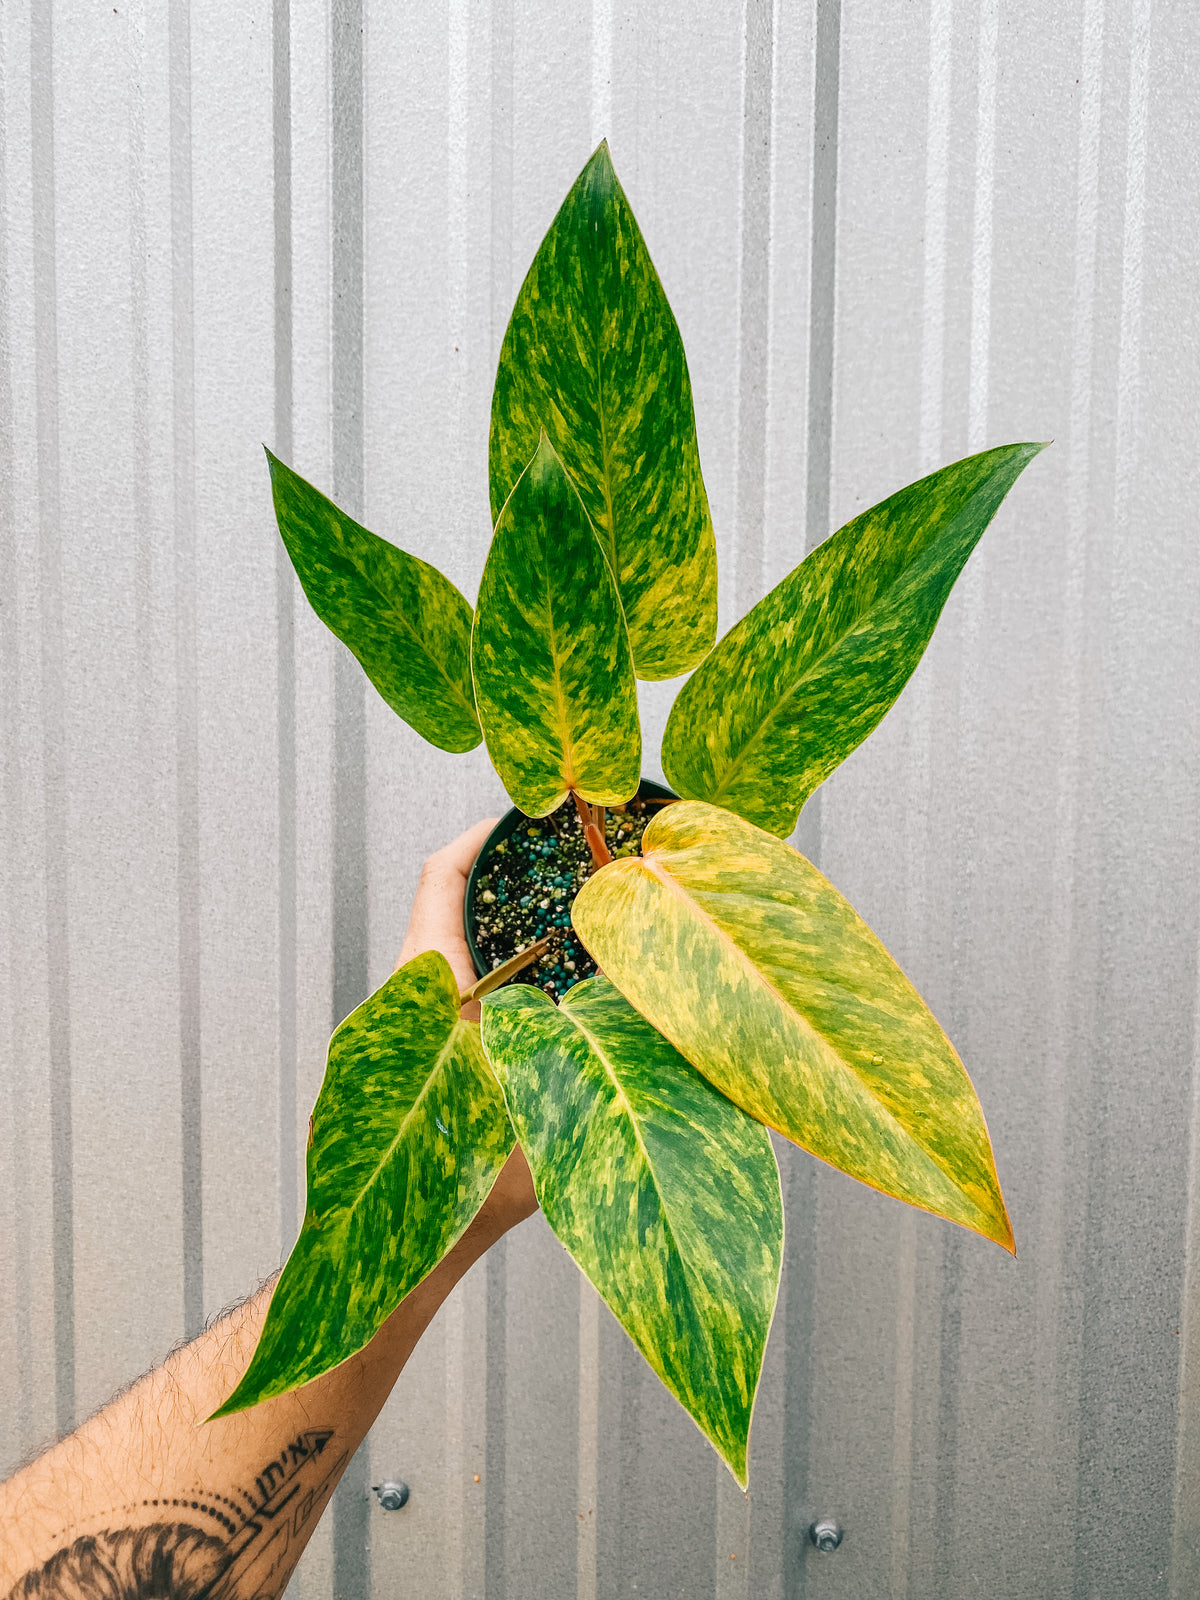 4" Philodendron 'Painted Lady'